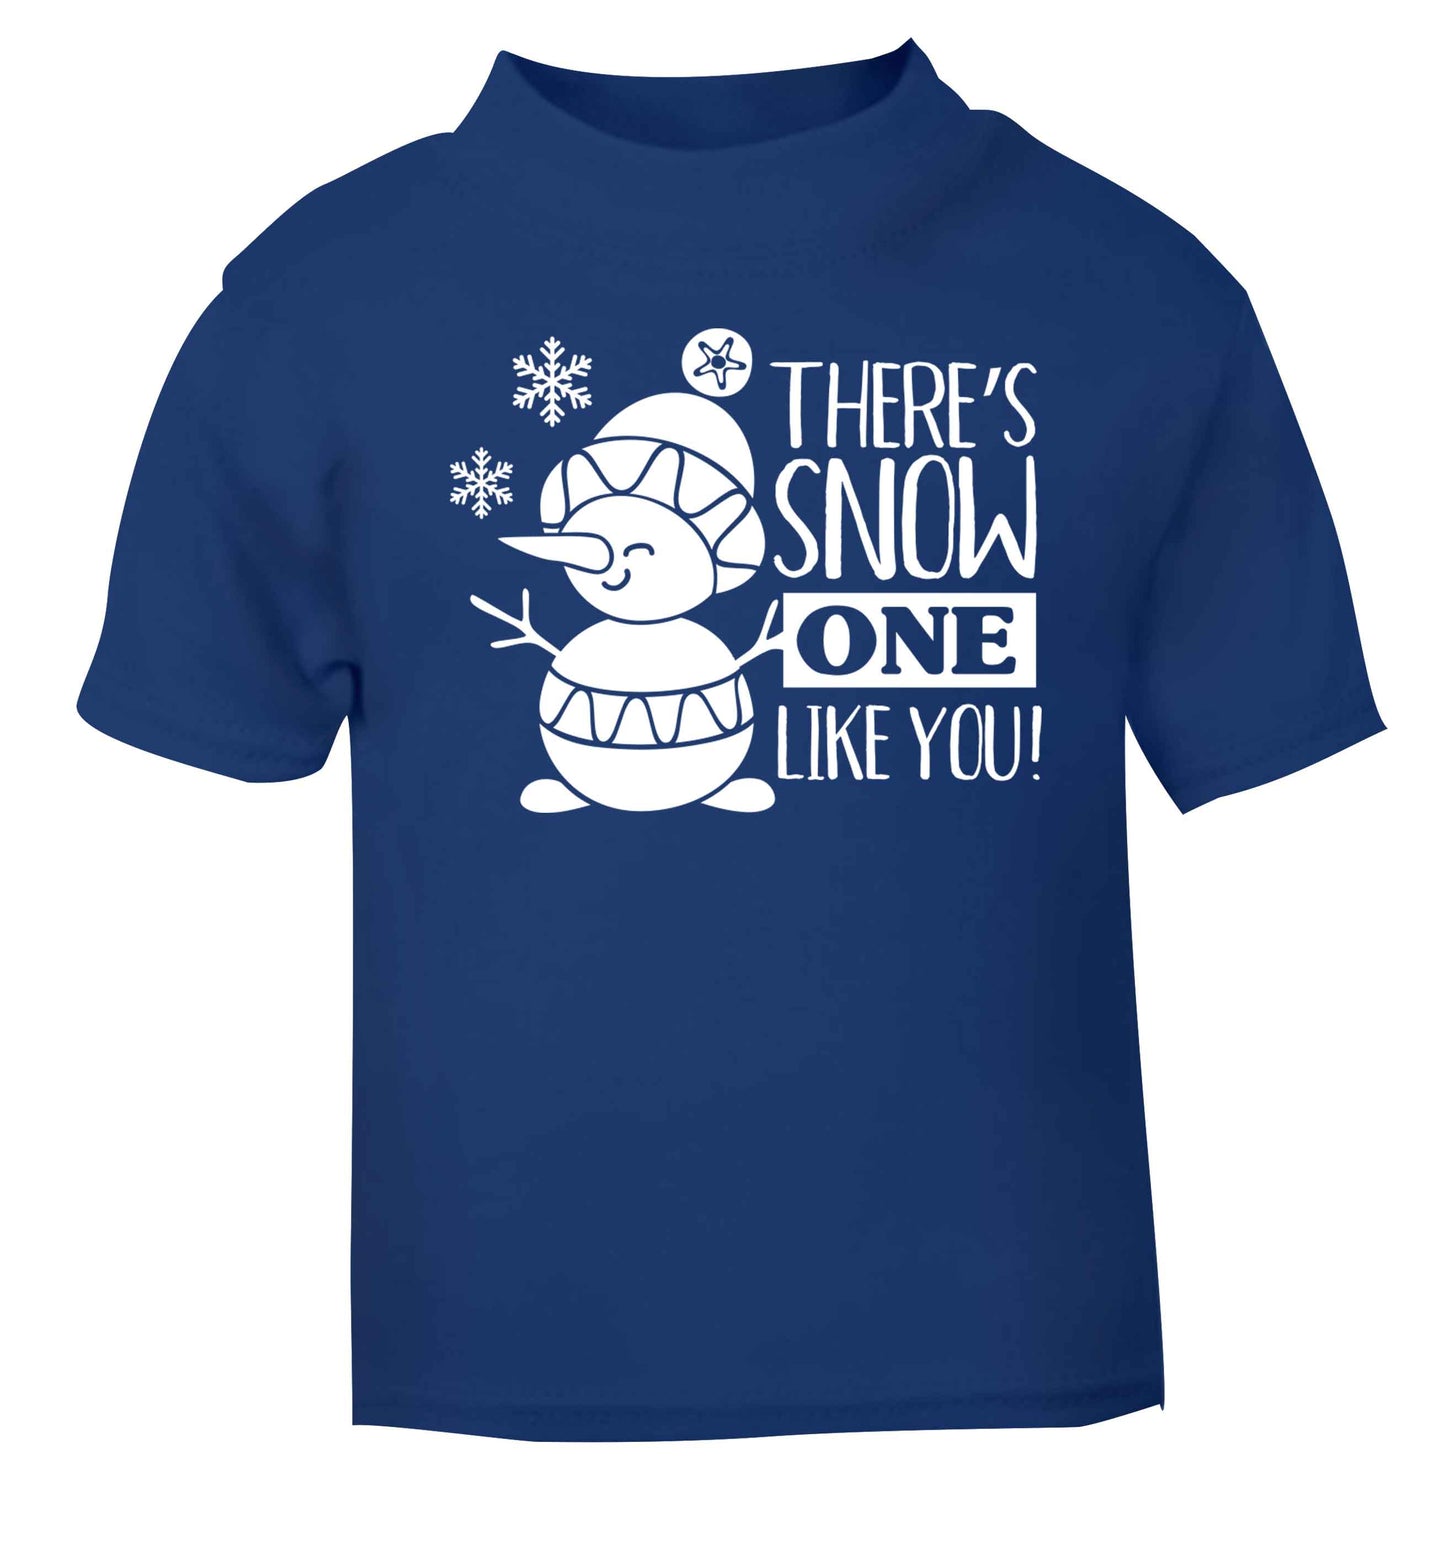 There's snow one like you blue baby toddler Tshirt 2 Years